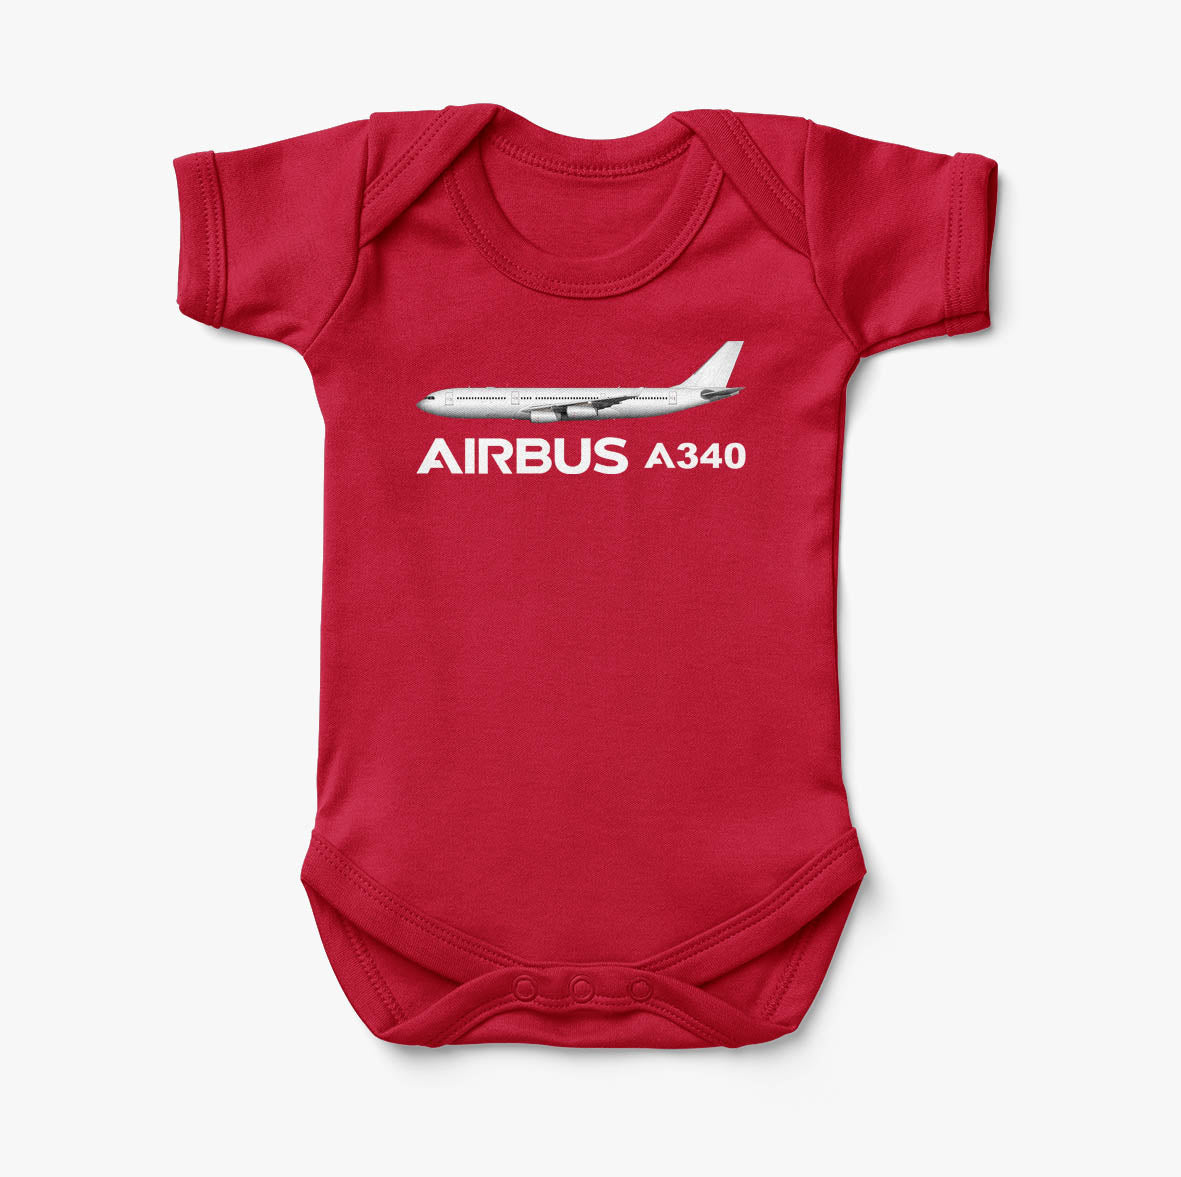 The Airbus A340 Designed Baby Bodysuits